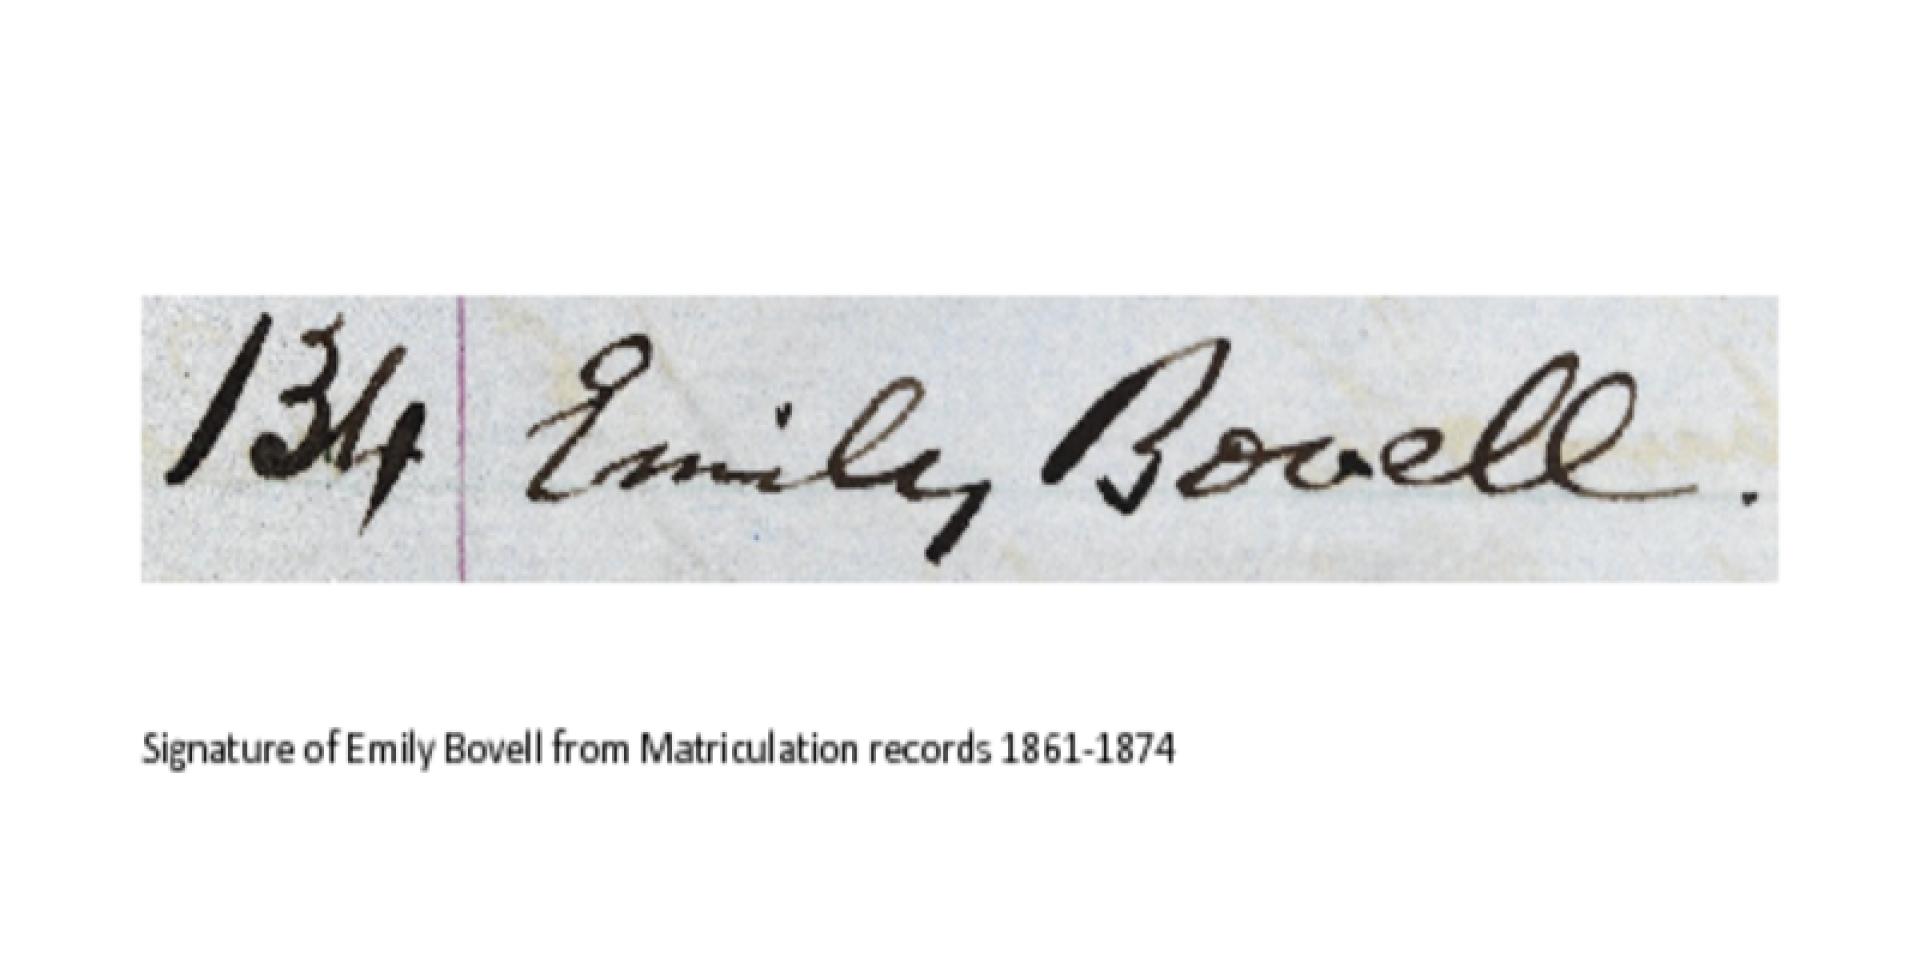 Signature of Emily Bovell from Matriculation records 1861-1874